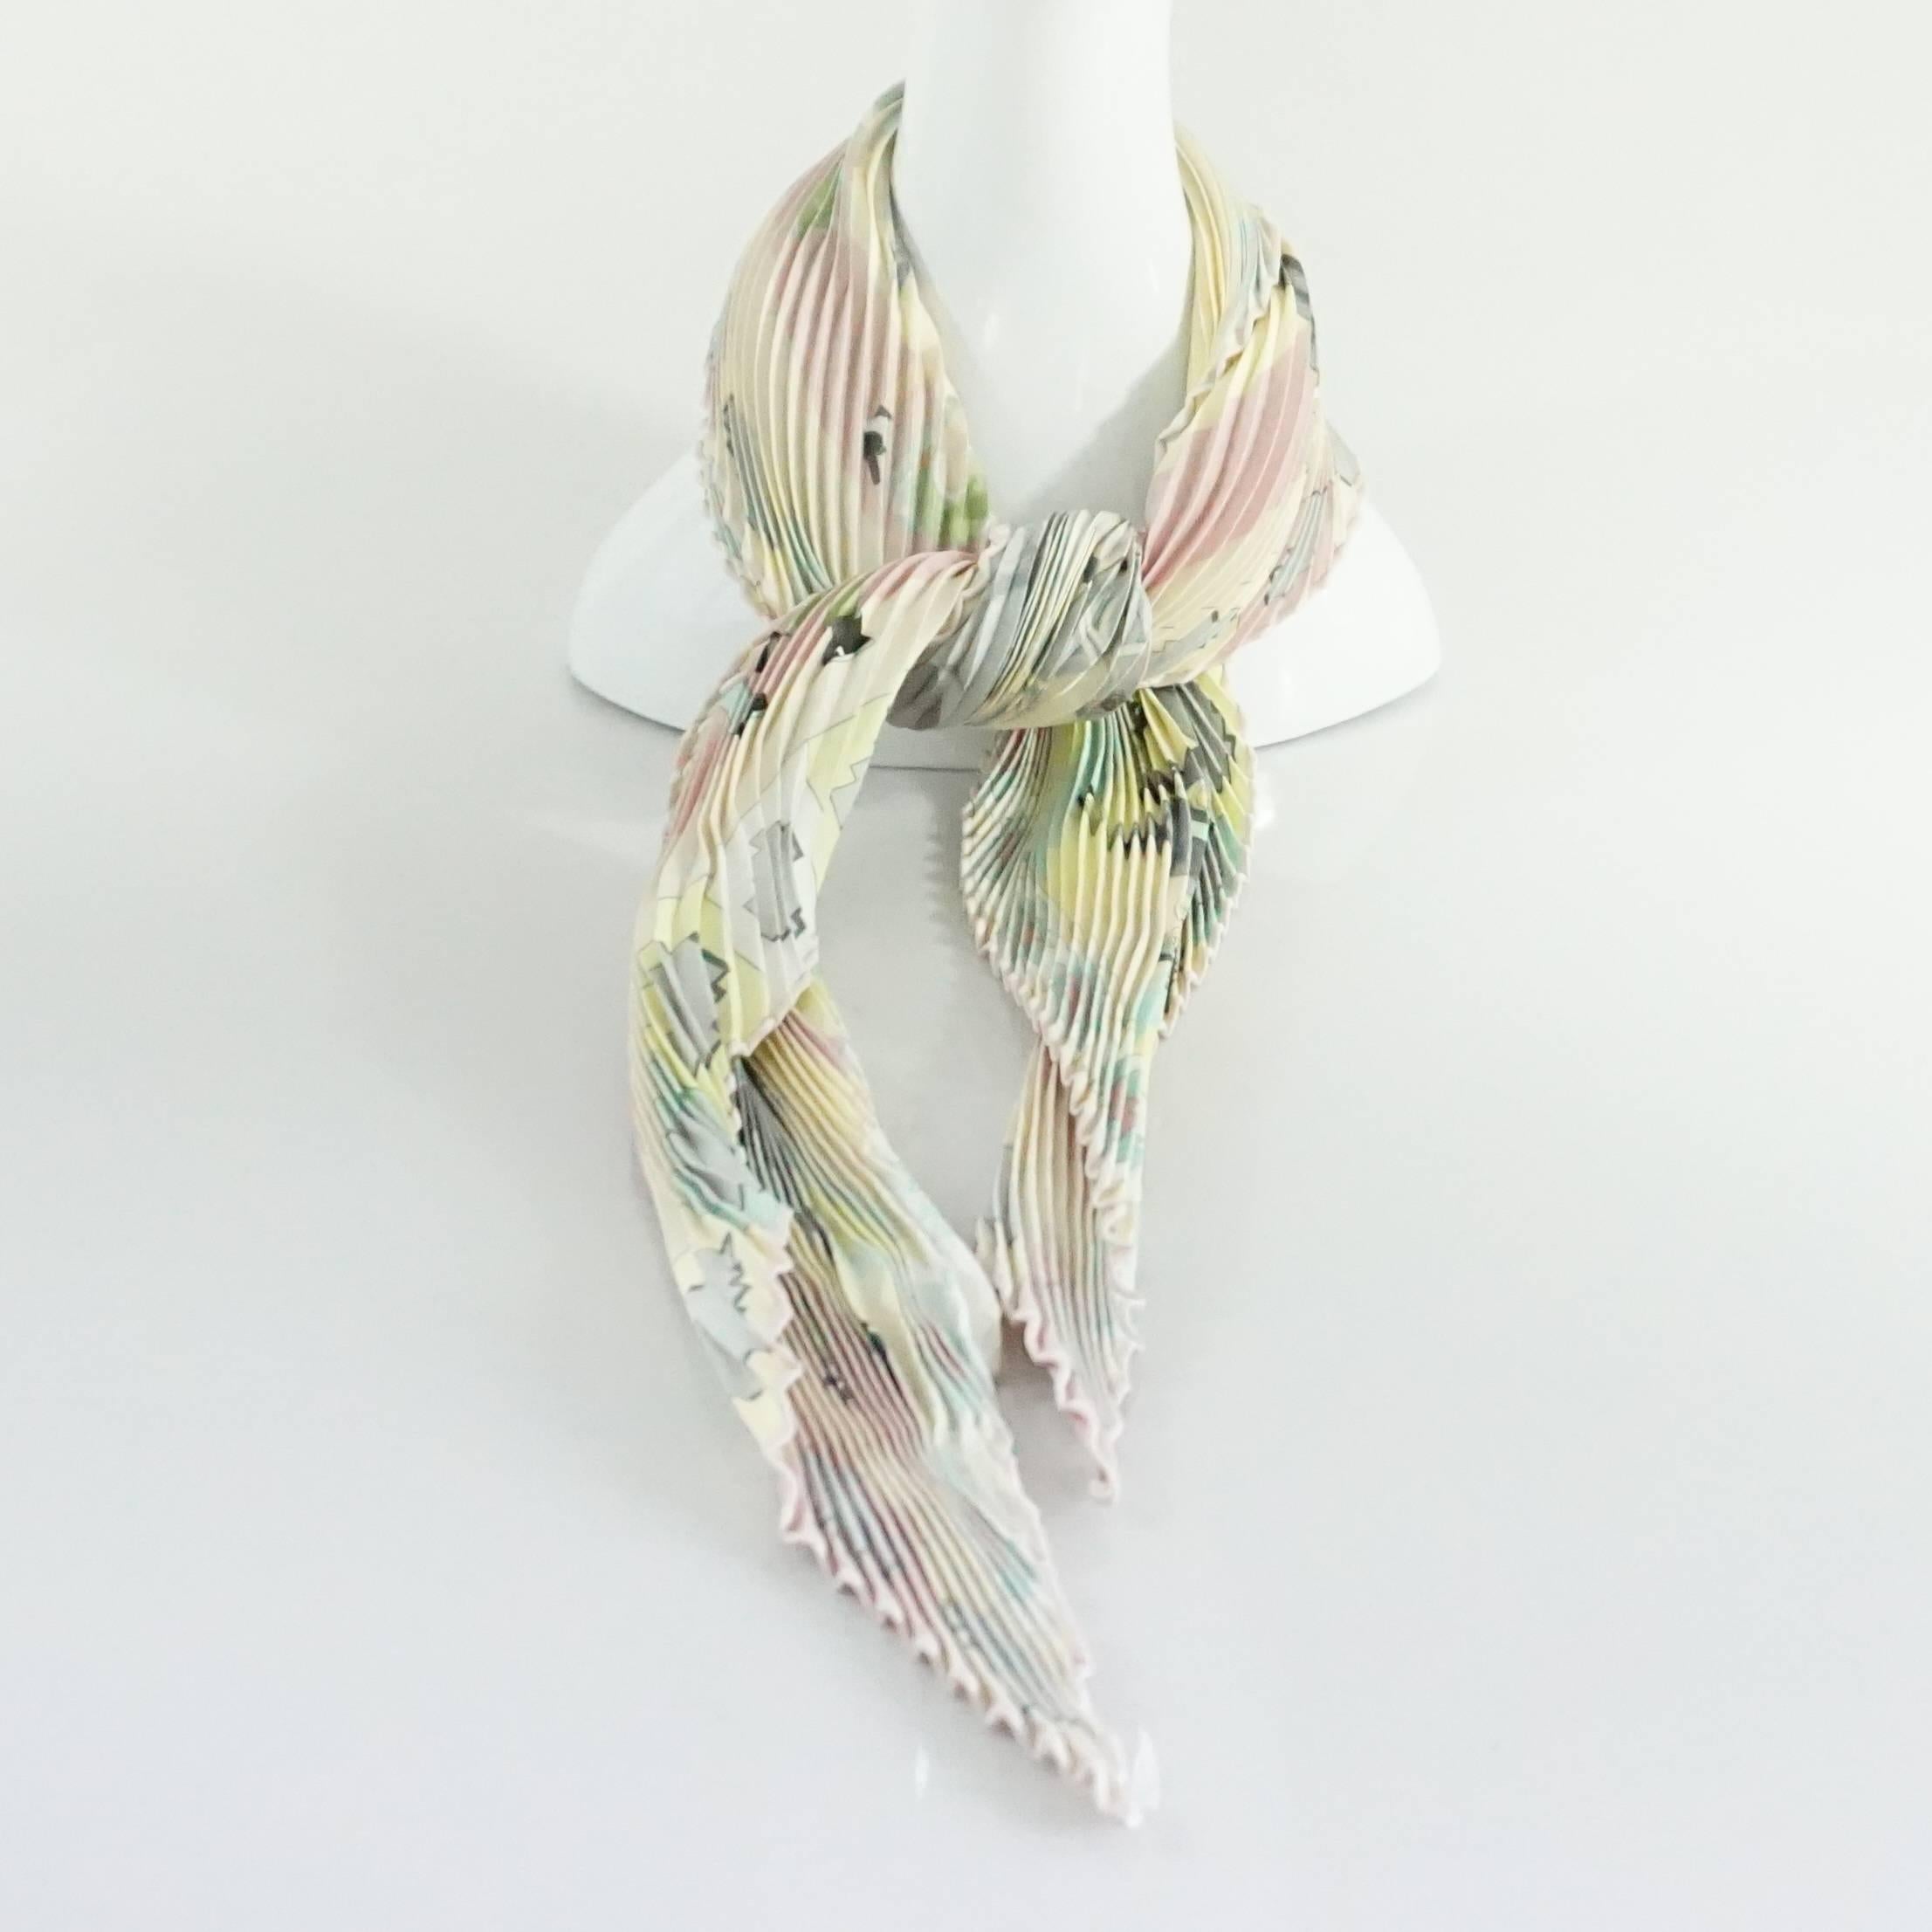 This Hermes pleated silk scarf has a beautiful polo scene on it. It is made of pastel colors and gray horses. This scarf is in excellent condition.

Measurements
Length (when closed):
Width (when closed):
Length (open):
Width (open):